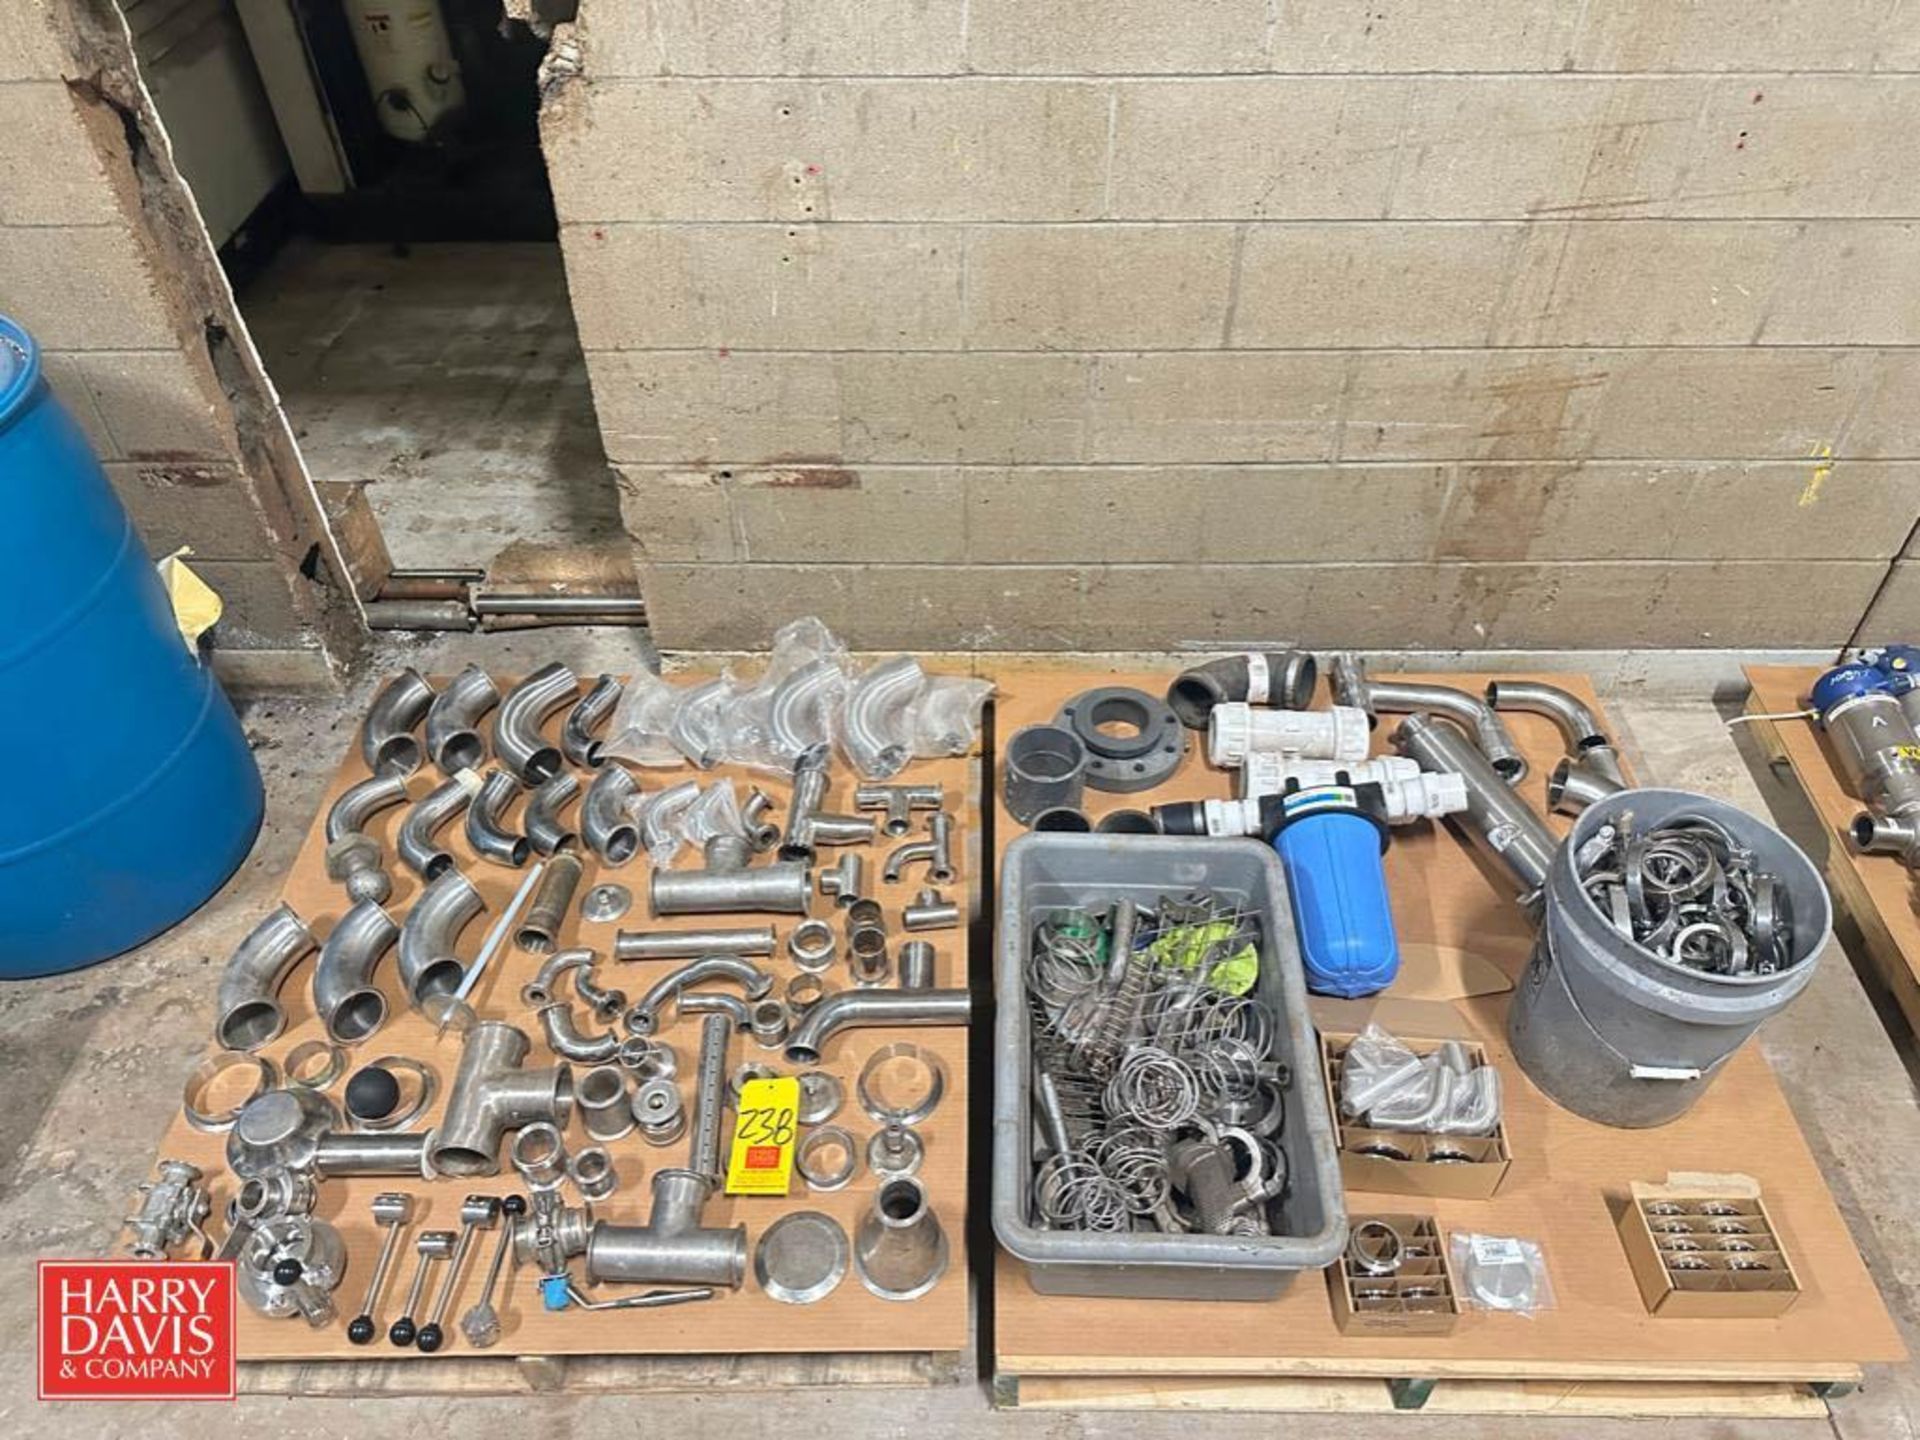 Assorted S/S, Including: Elbows, Touch Screen, Valves and Valve Parts, Springs, Ferrels and Clamps